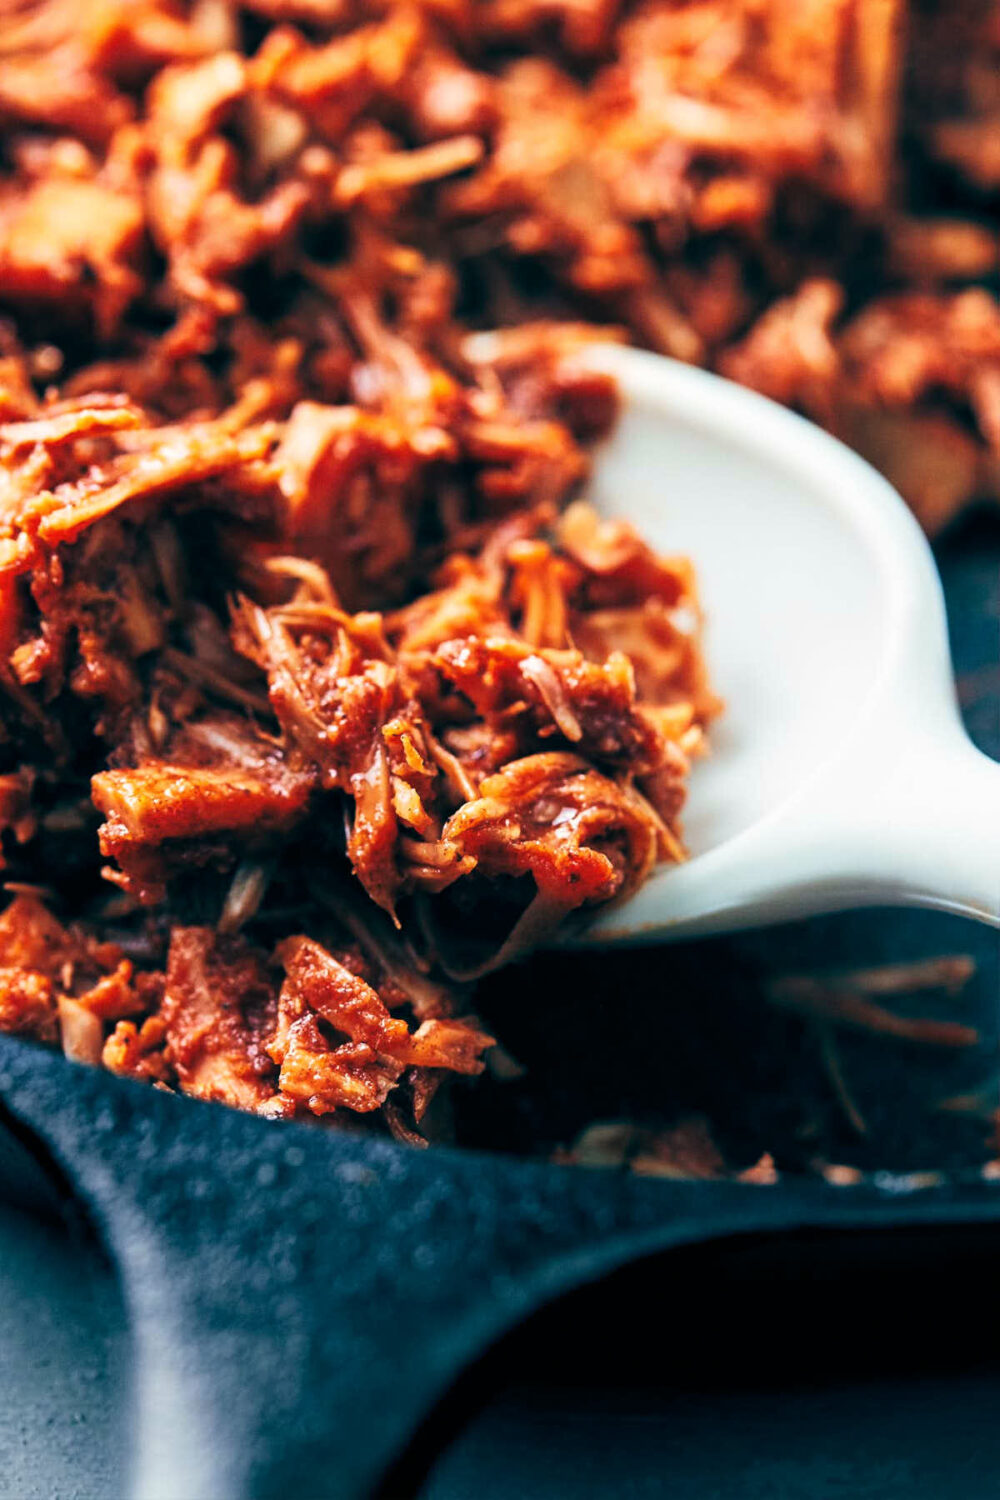 Vegan pulled pork being cooked down with homemade barbecue sauce in a cast iron pan